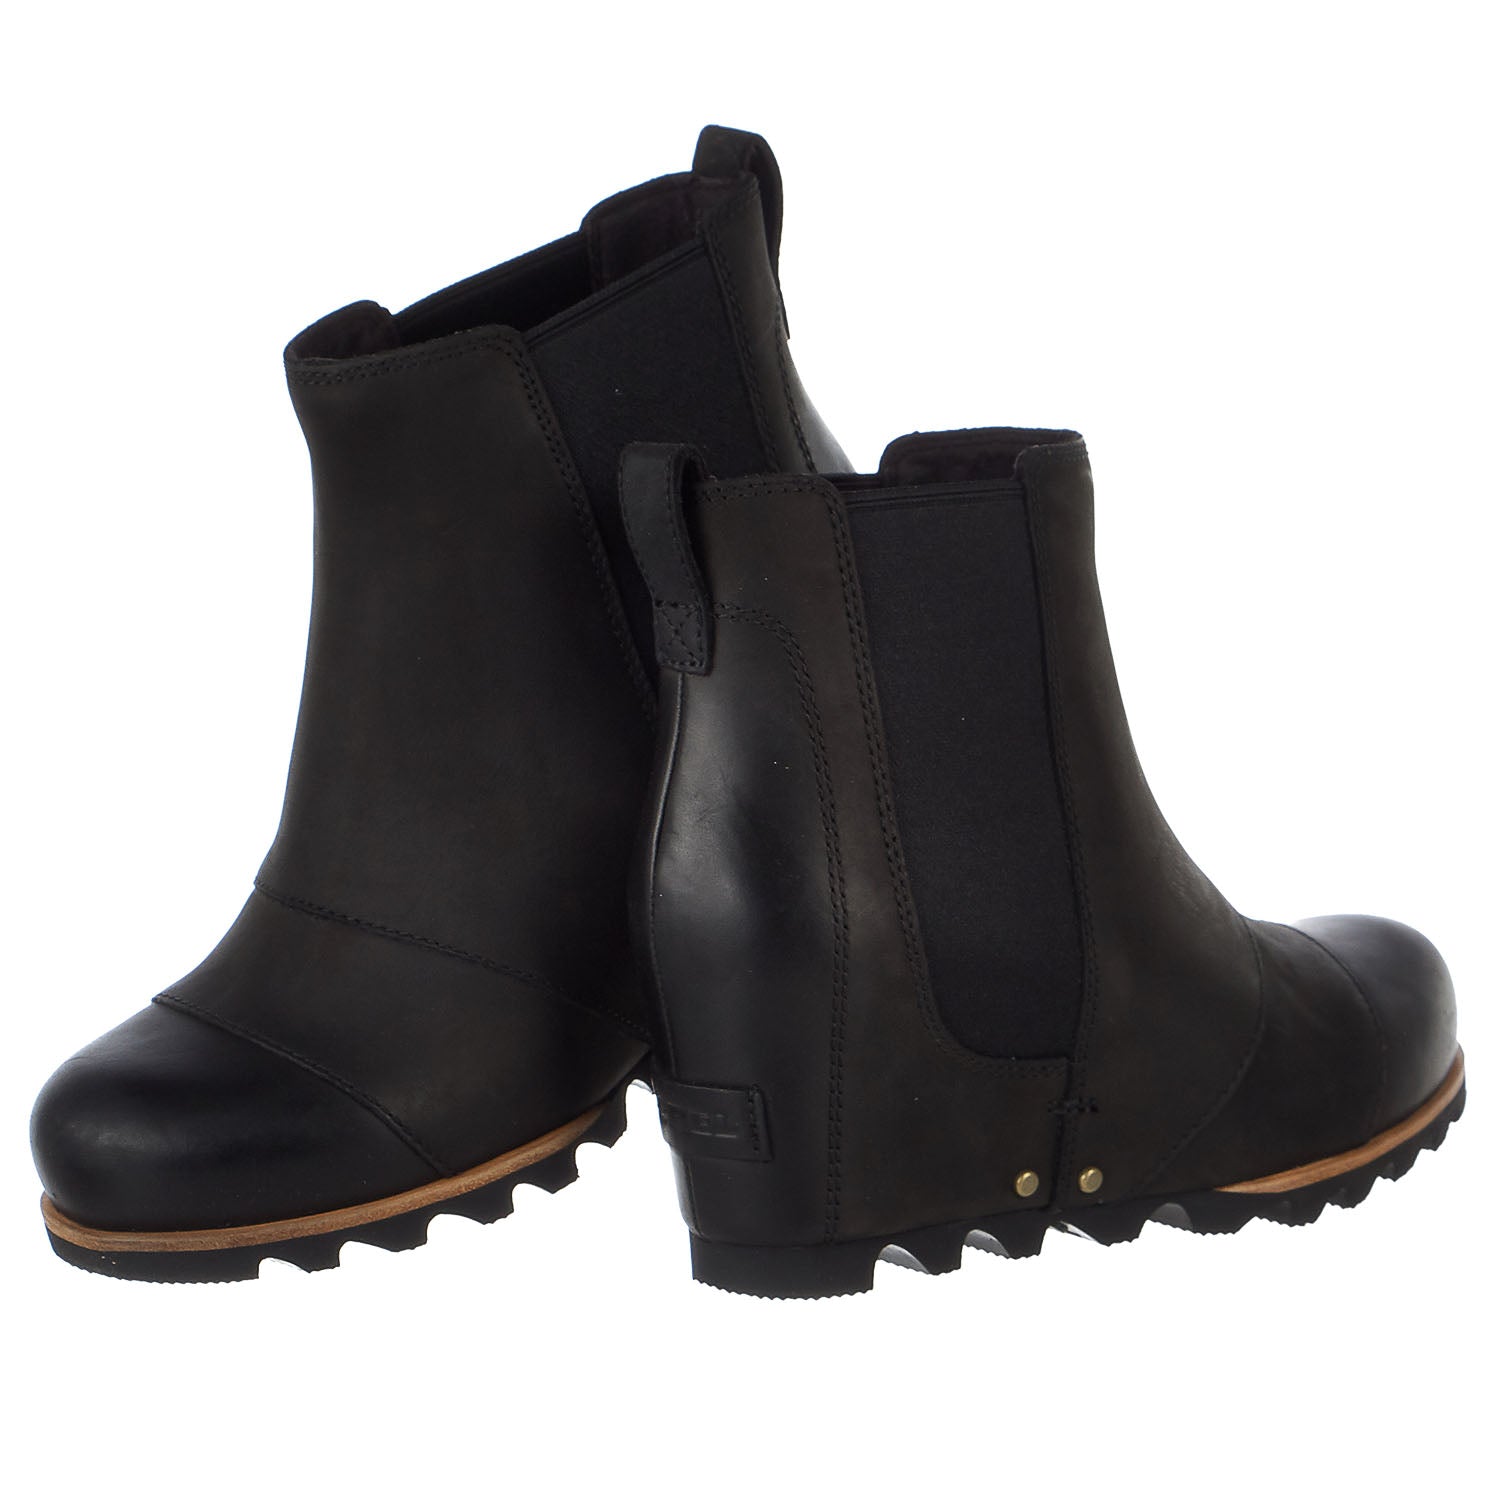 black wedge boots for women